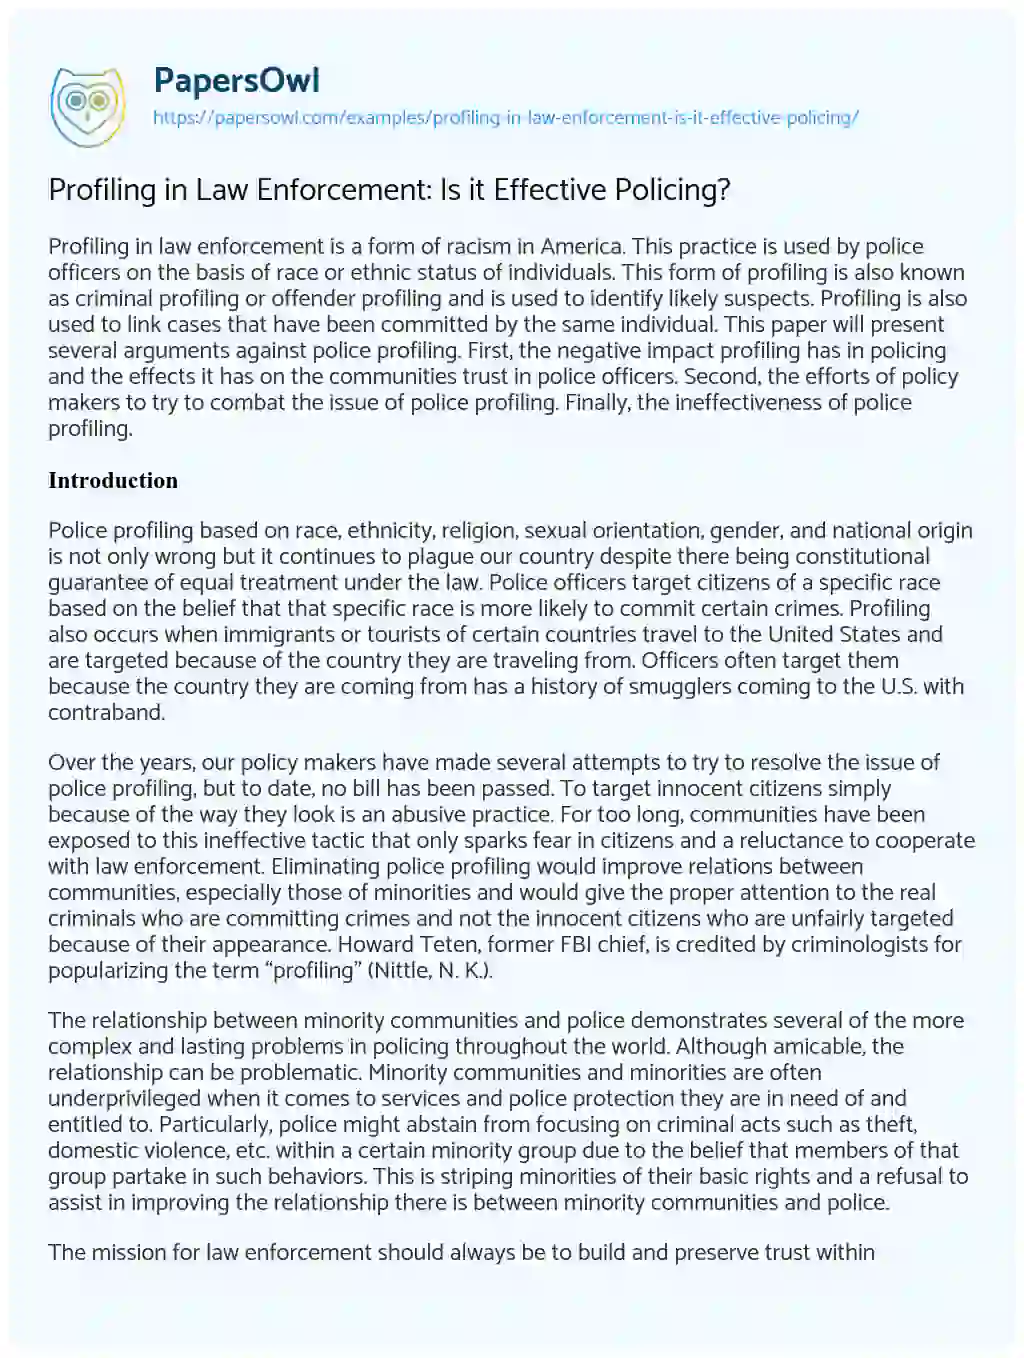 Essay on Profiling in Law Enforcement: is it Effective Policing?